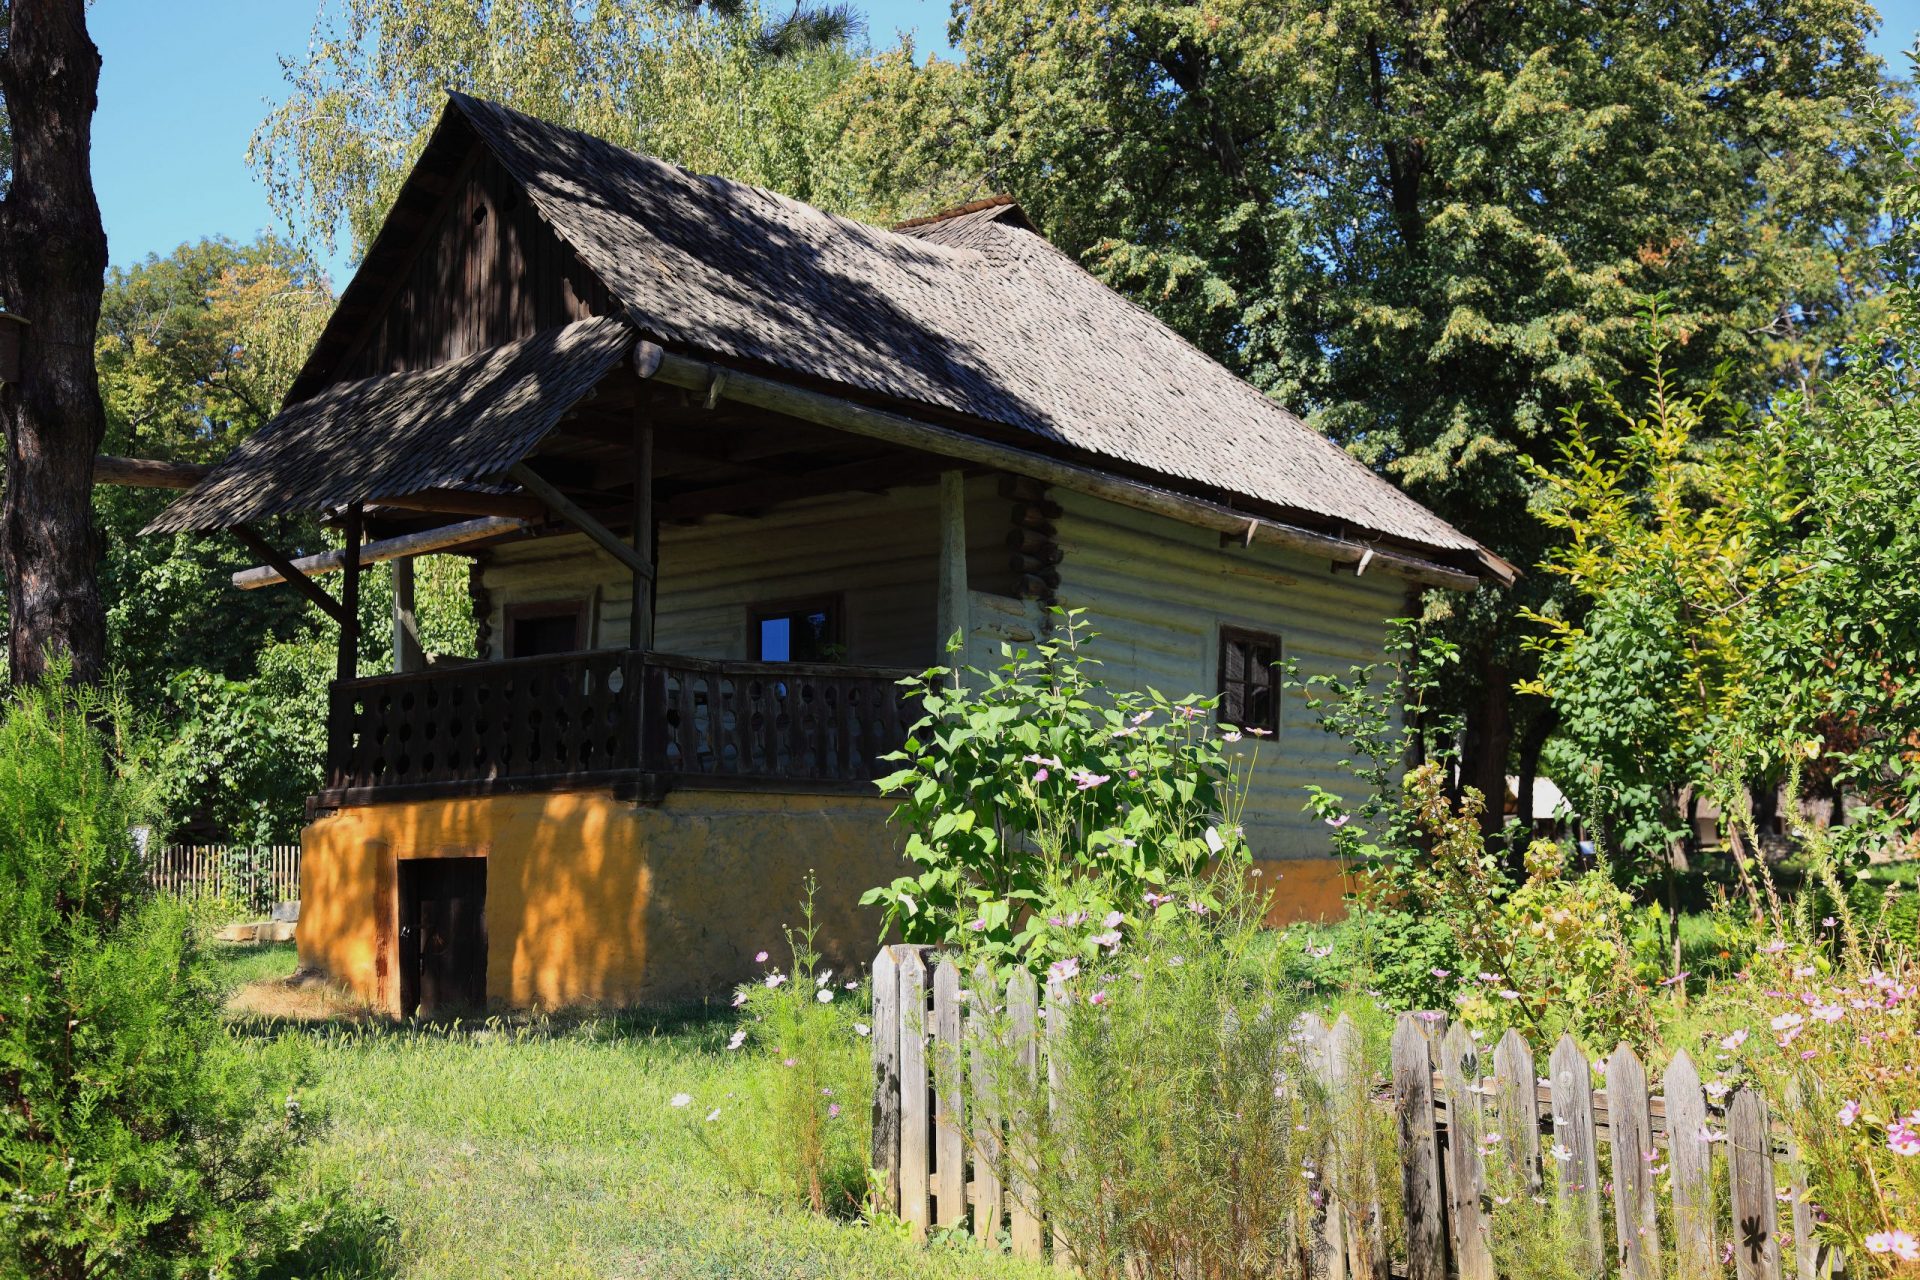 <p>The city also has many museums, such as the Muzeul Satului (Romanian Village Museum), an open-air museum in which you can discover traditional houses from different regions of Romania. A particularly interesting cultural visit.</p>